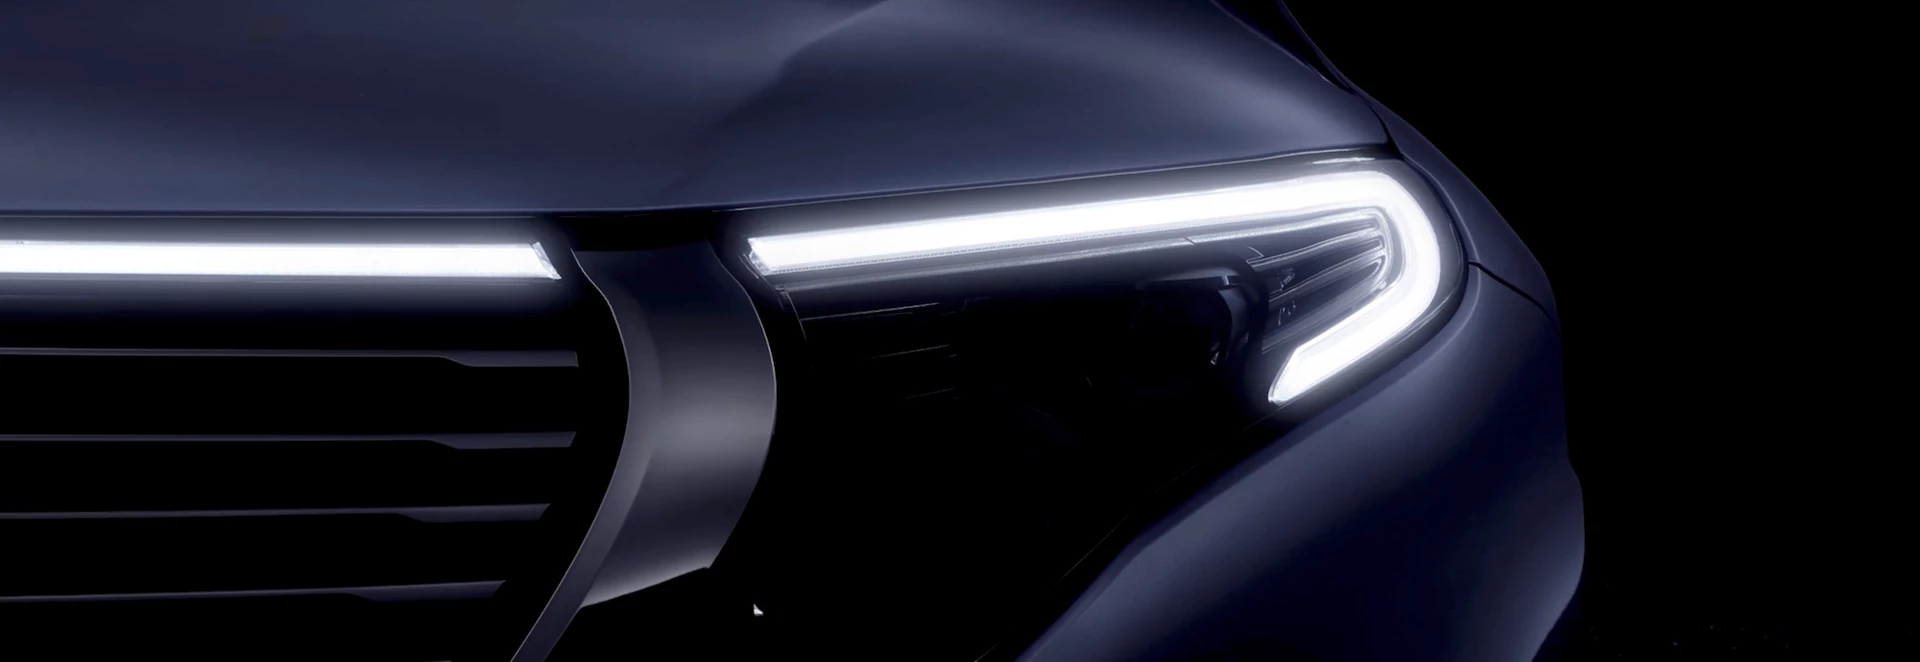 Mercedes EQ C electric crossover teased